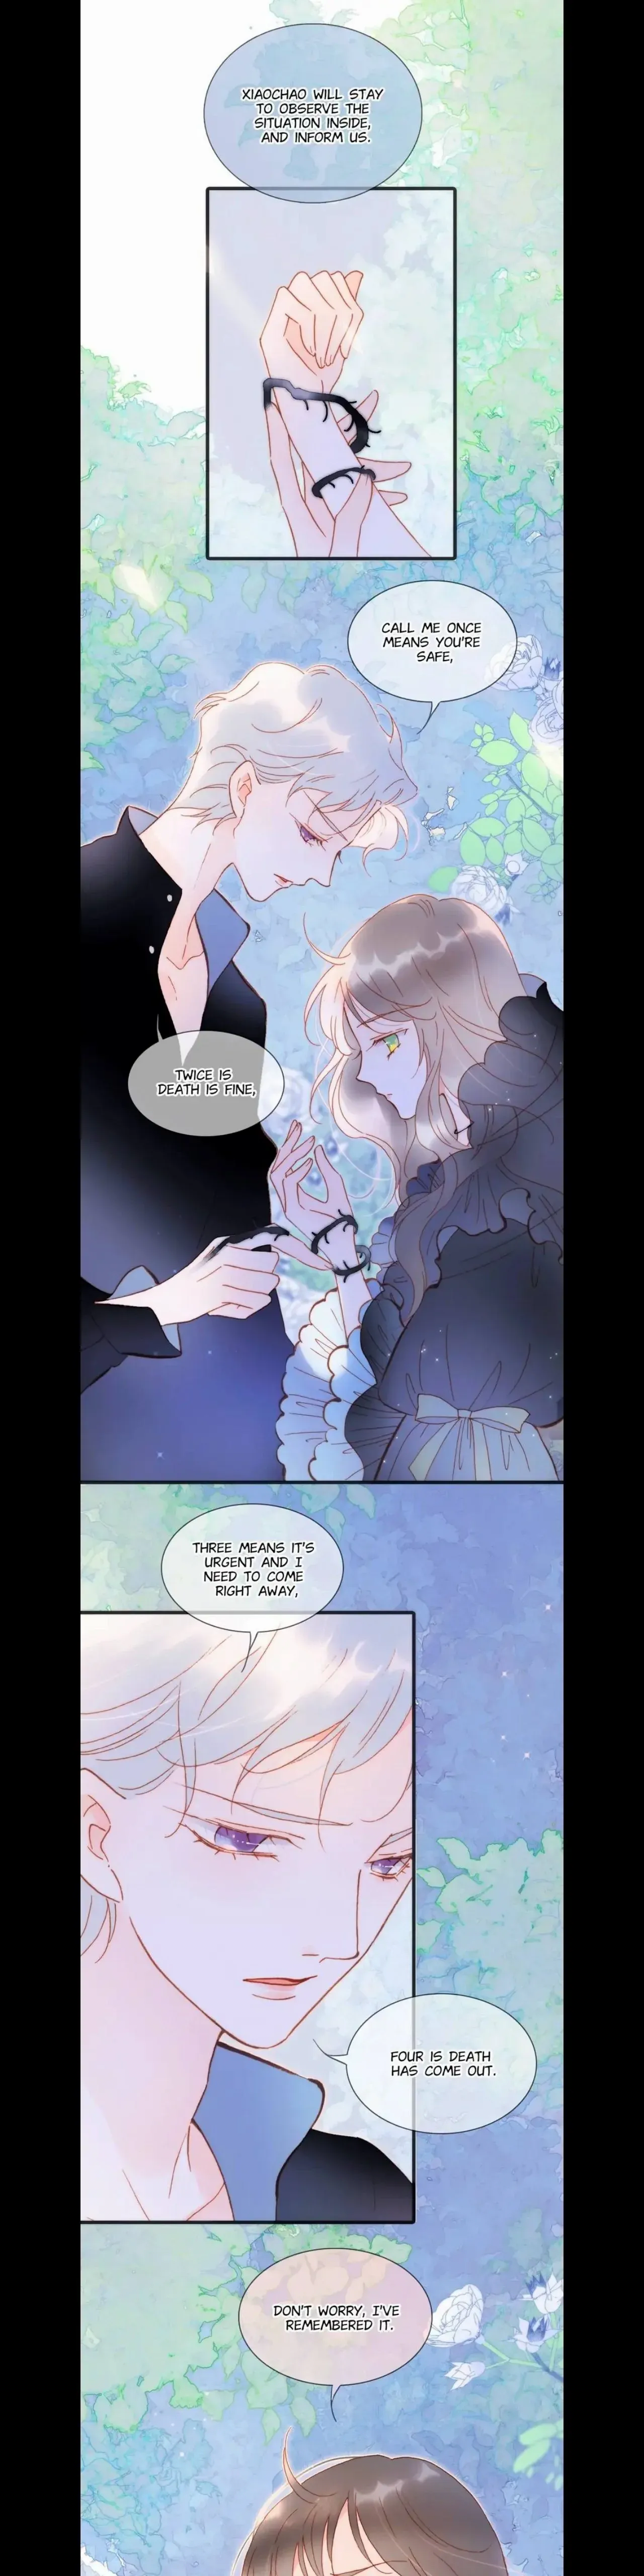 Soundless Cosmos - Page 2